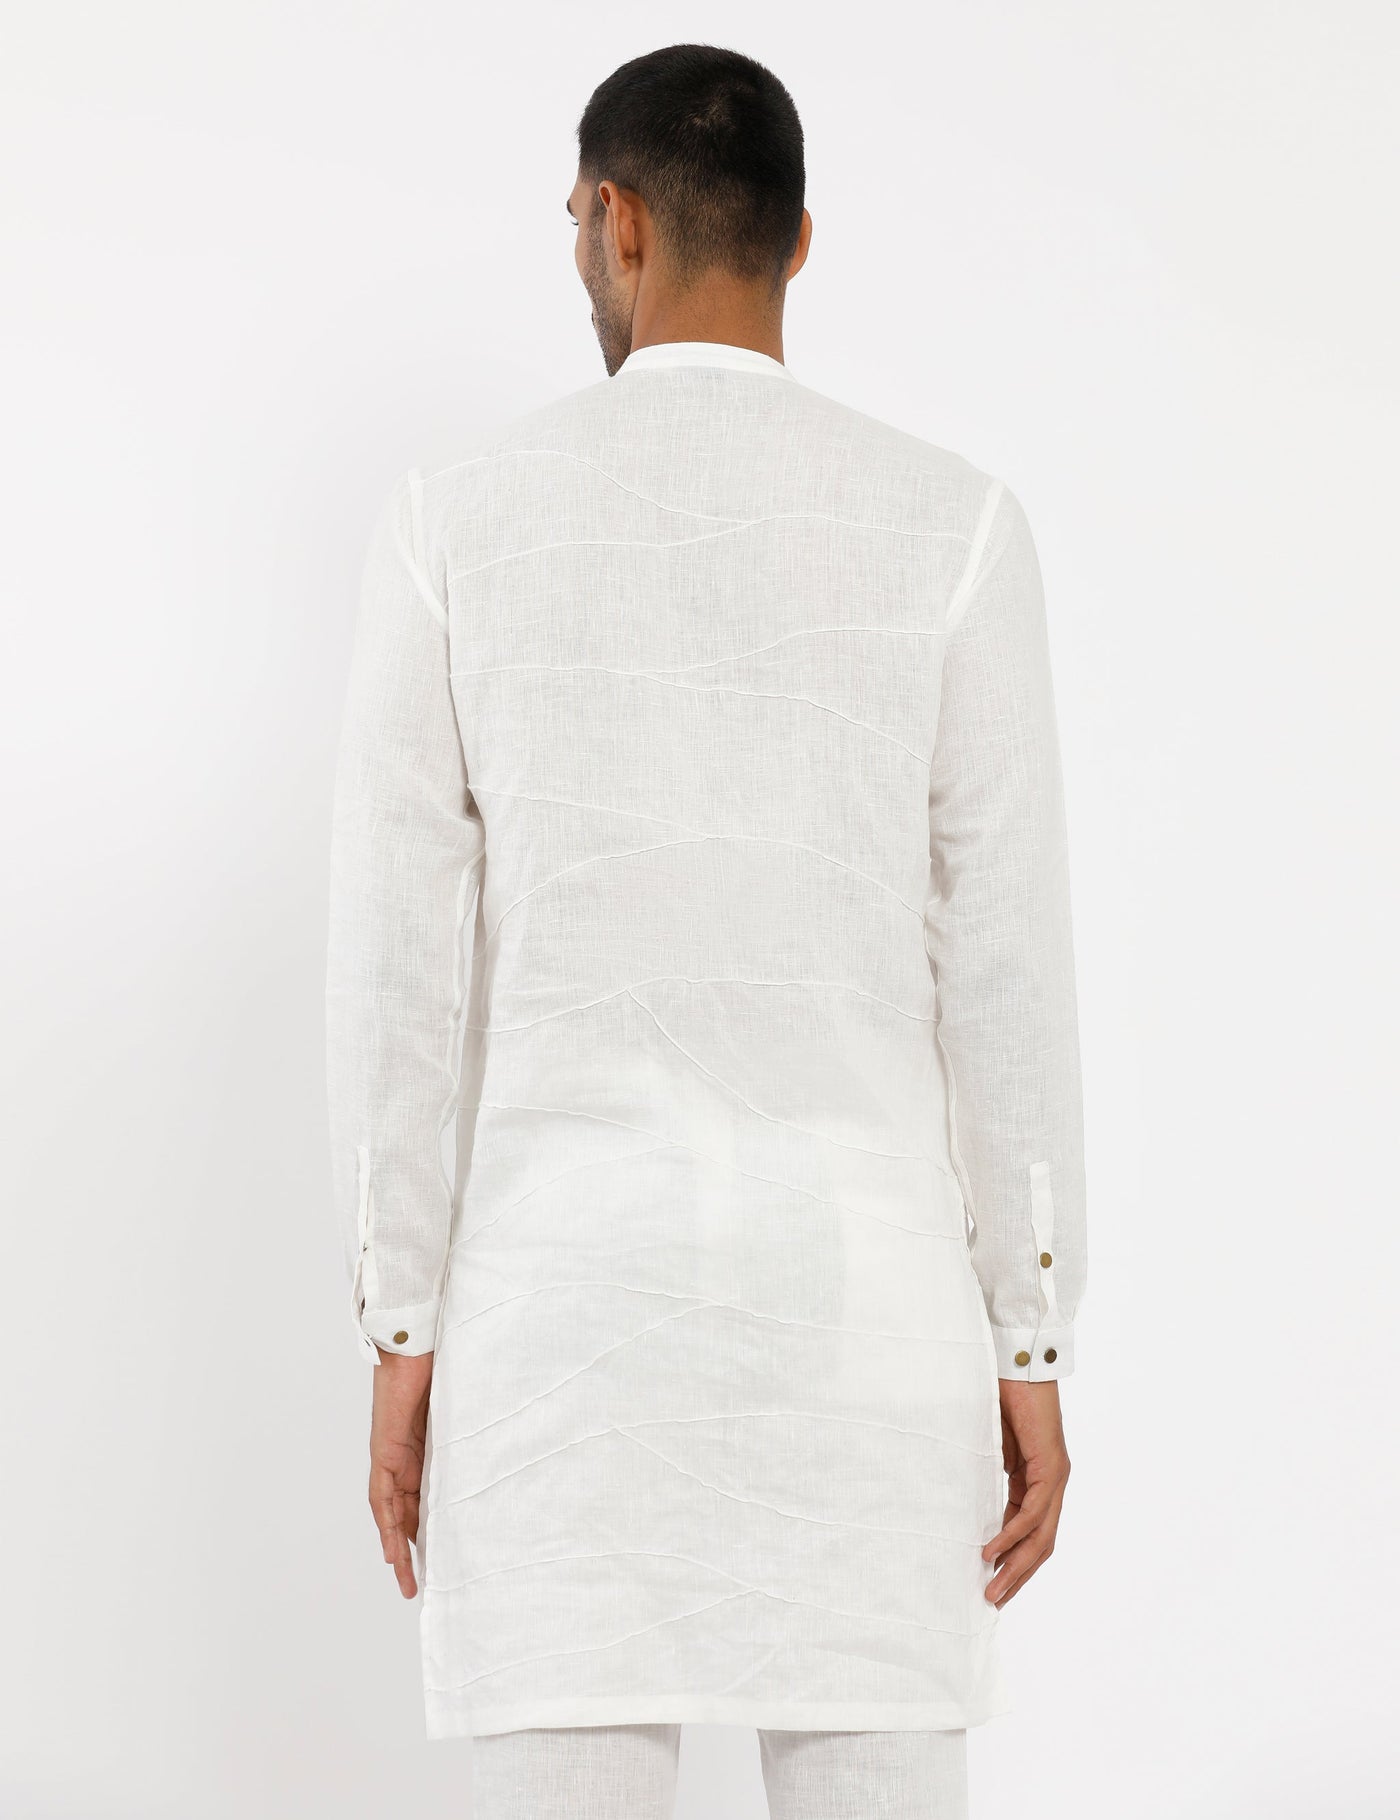 White Desert Kurta Indian Clothing in Denver, CO, Aurora, CO, Boulder, CO, Fort Collins, CO, Colorado Springs, CO, Parker, CO, Highlands Ranch, CO, Cherry Creek, CO, Centennial, CO, and Longmont, CO. NATIONWIDE SHIPPING USA- India Fashion X